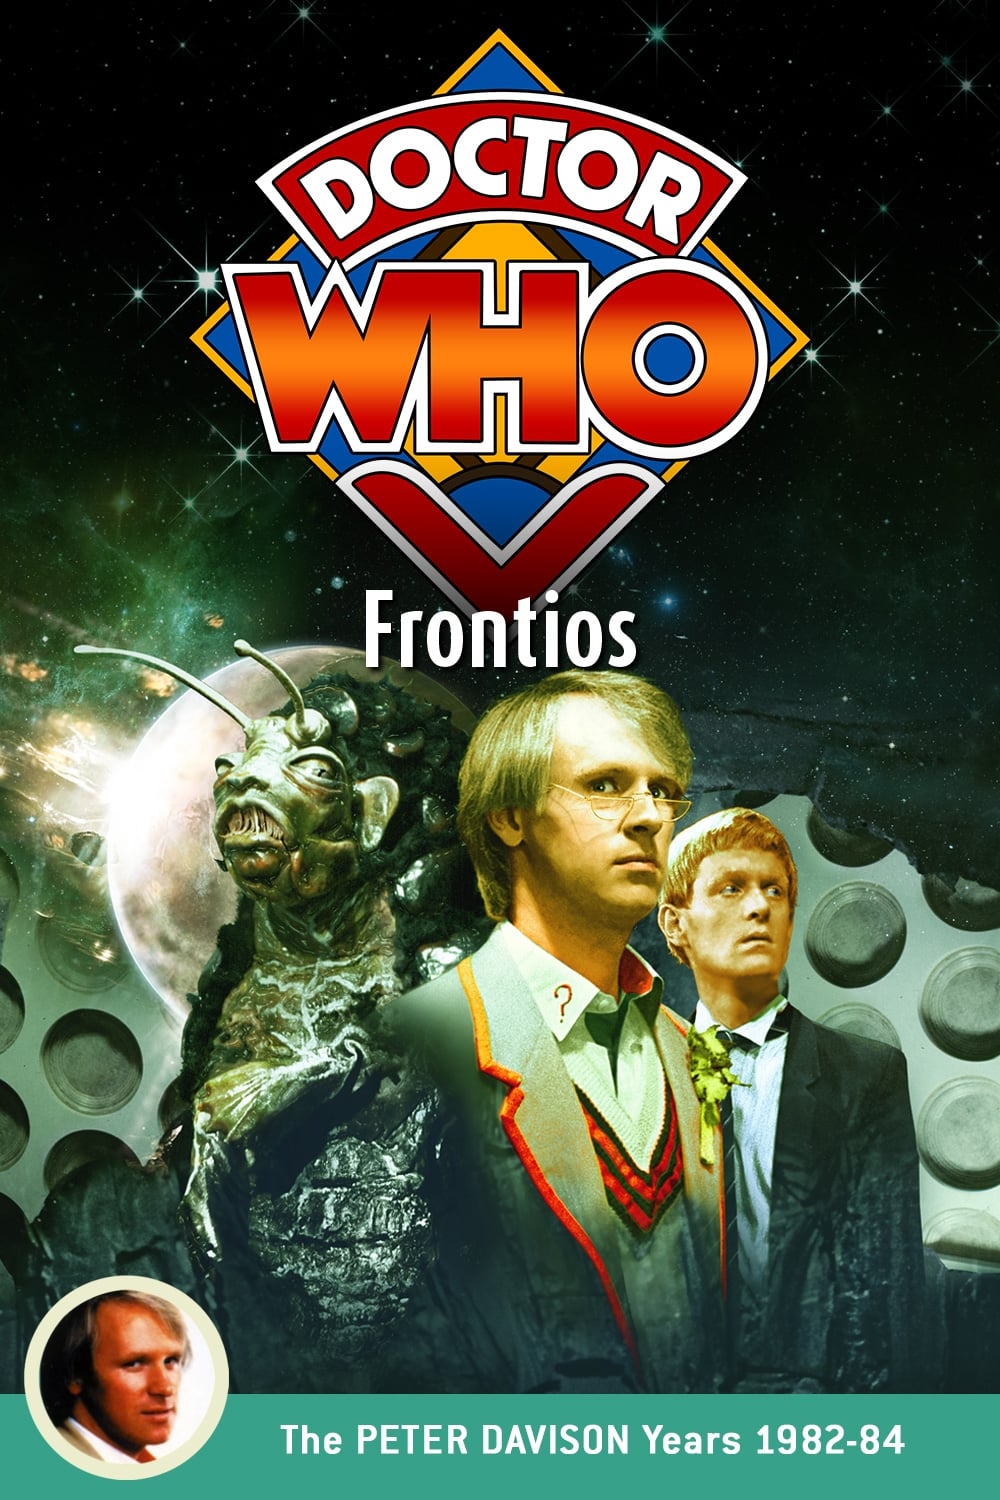 Doctor Who: Frontios (1984)